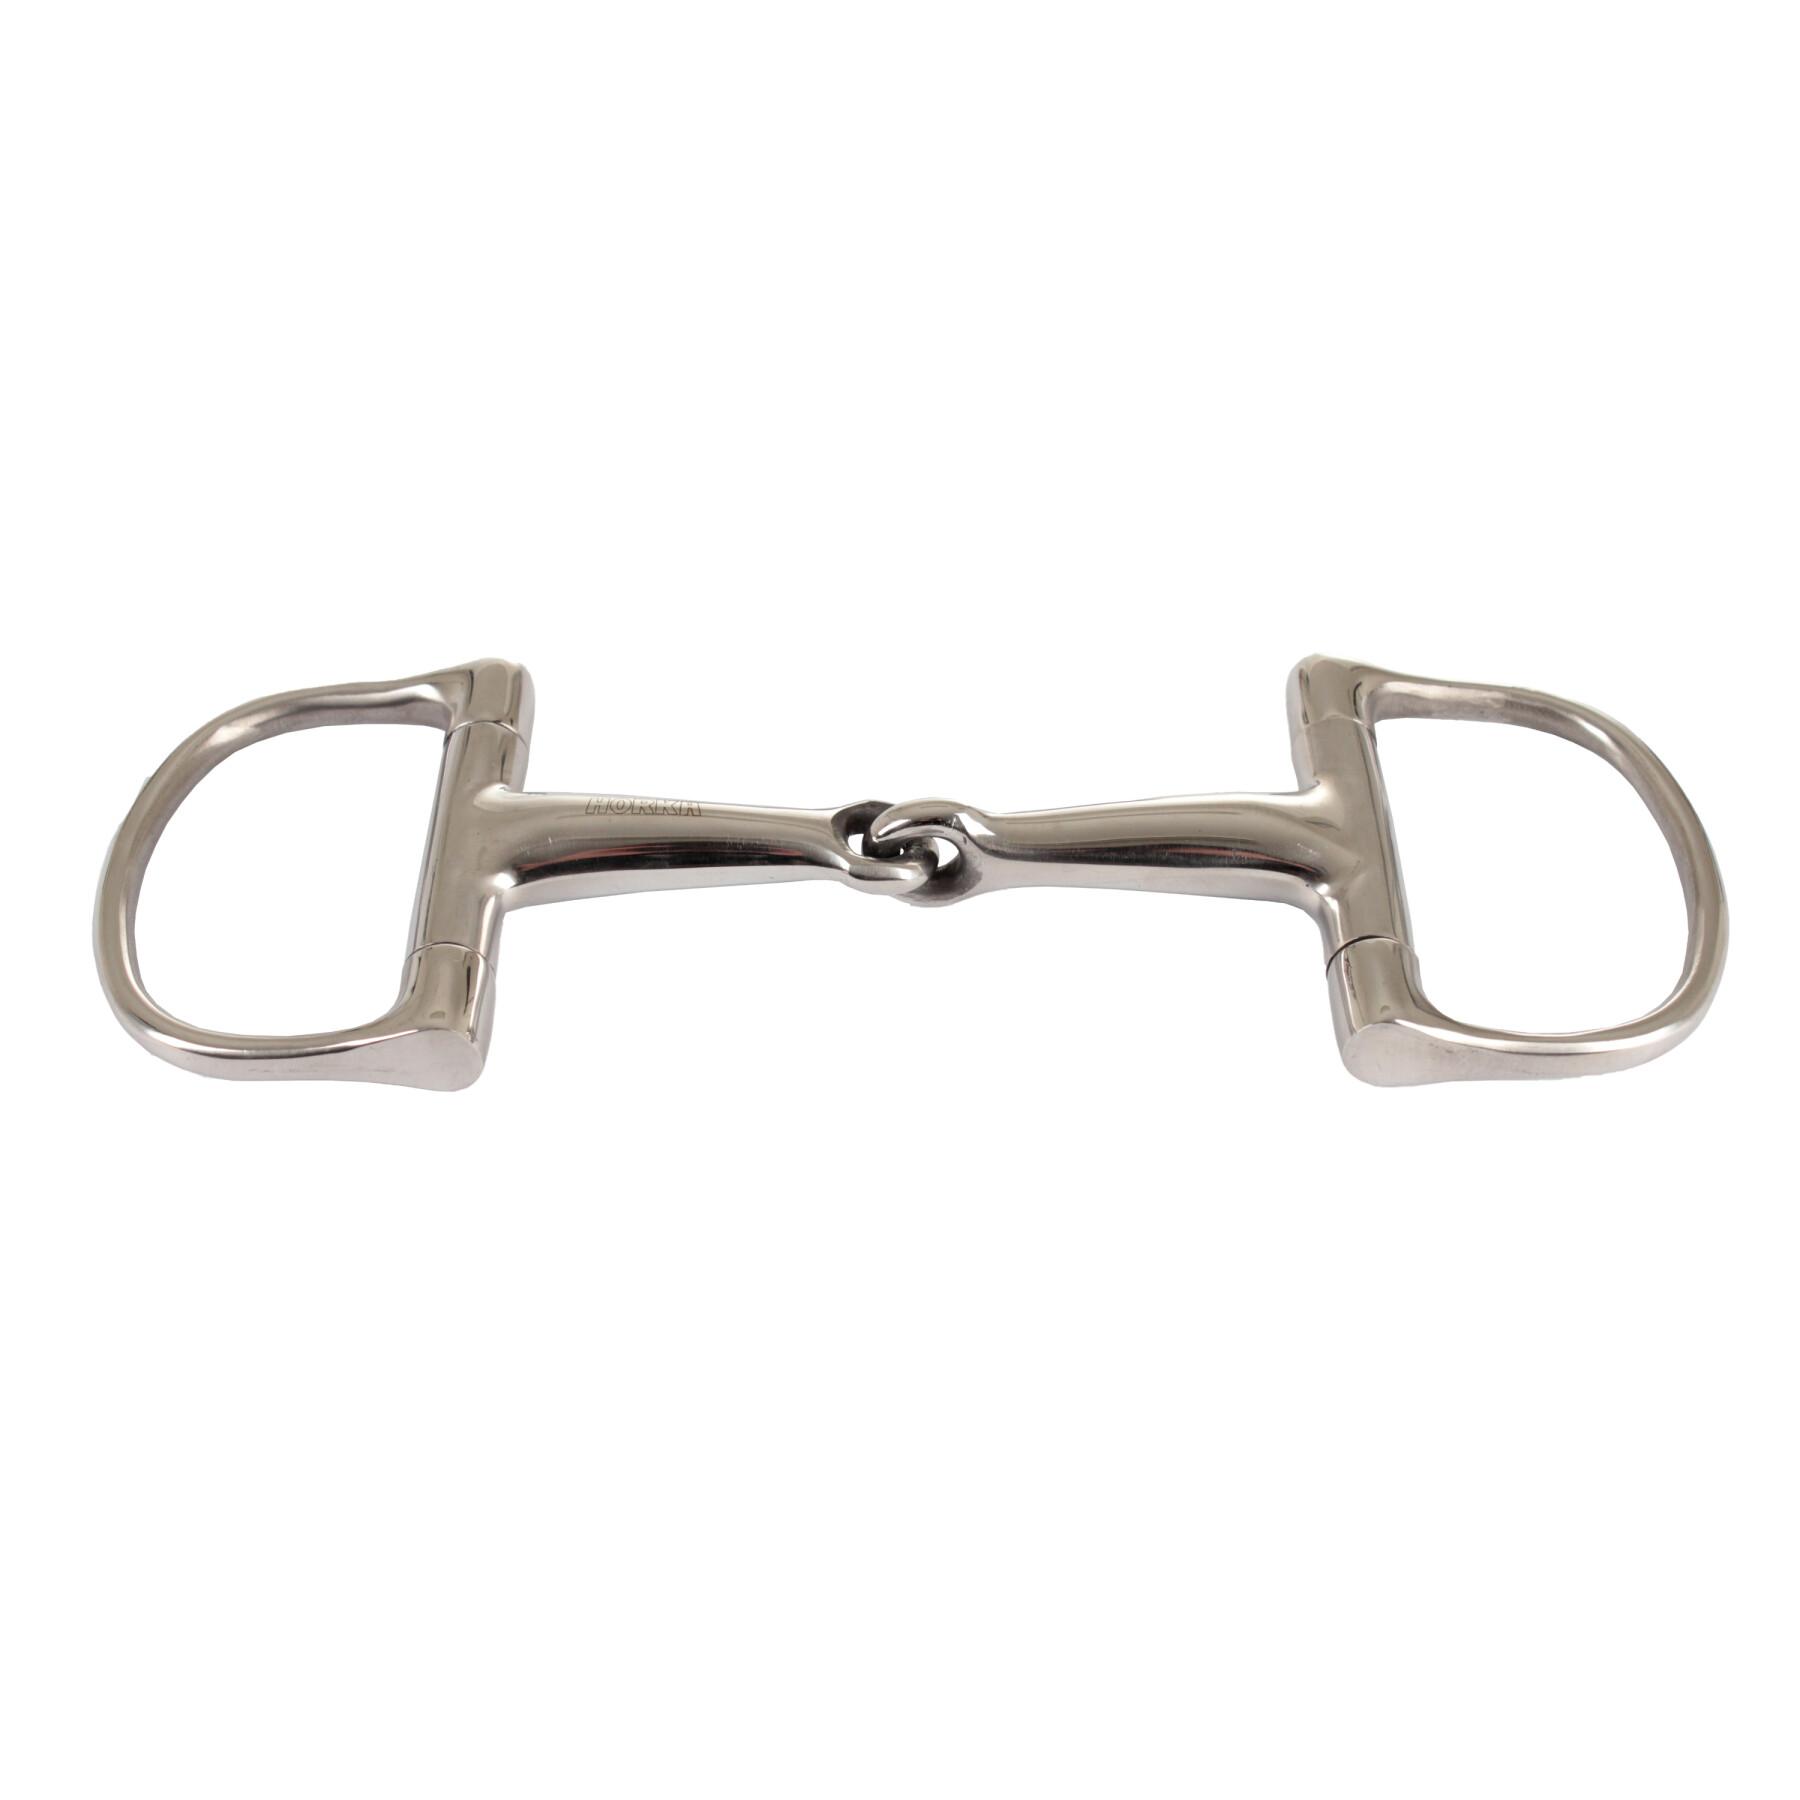 2 ring horse bit with stainless steel joint Horka